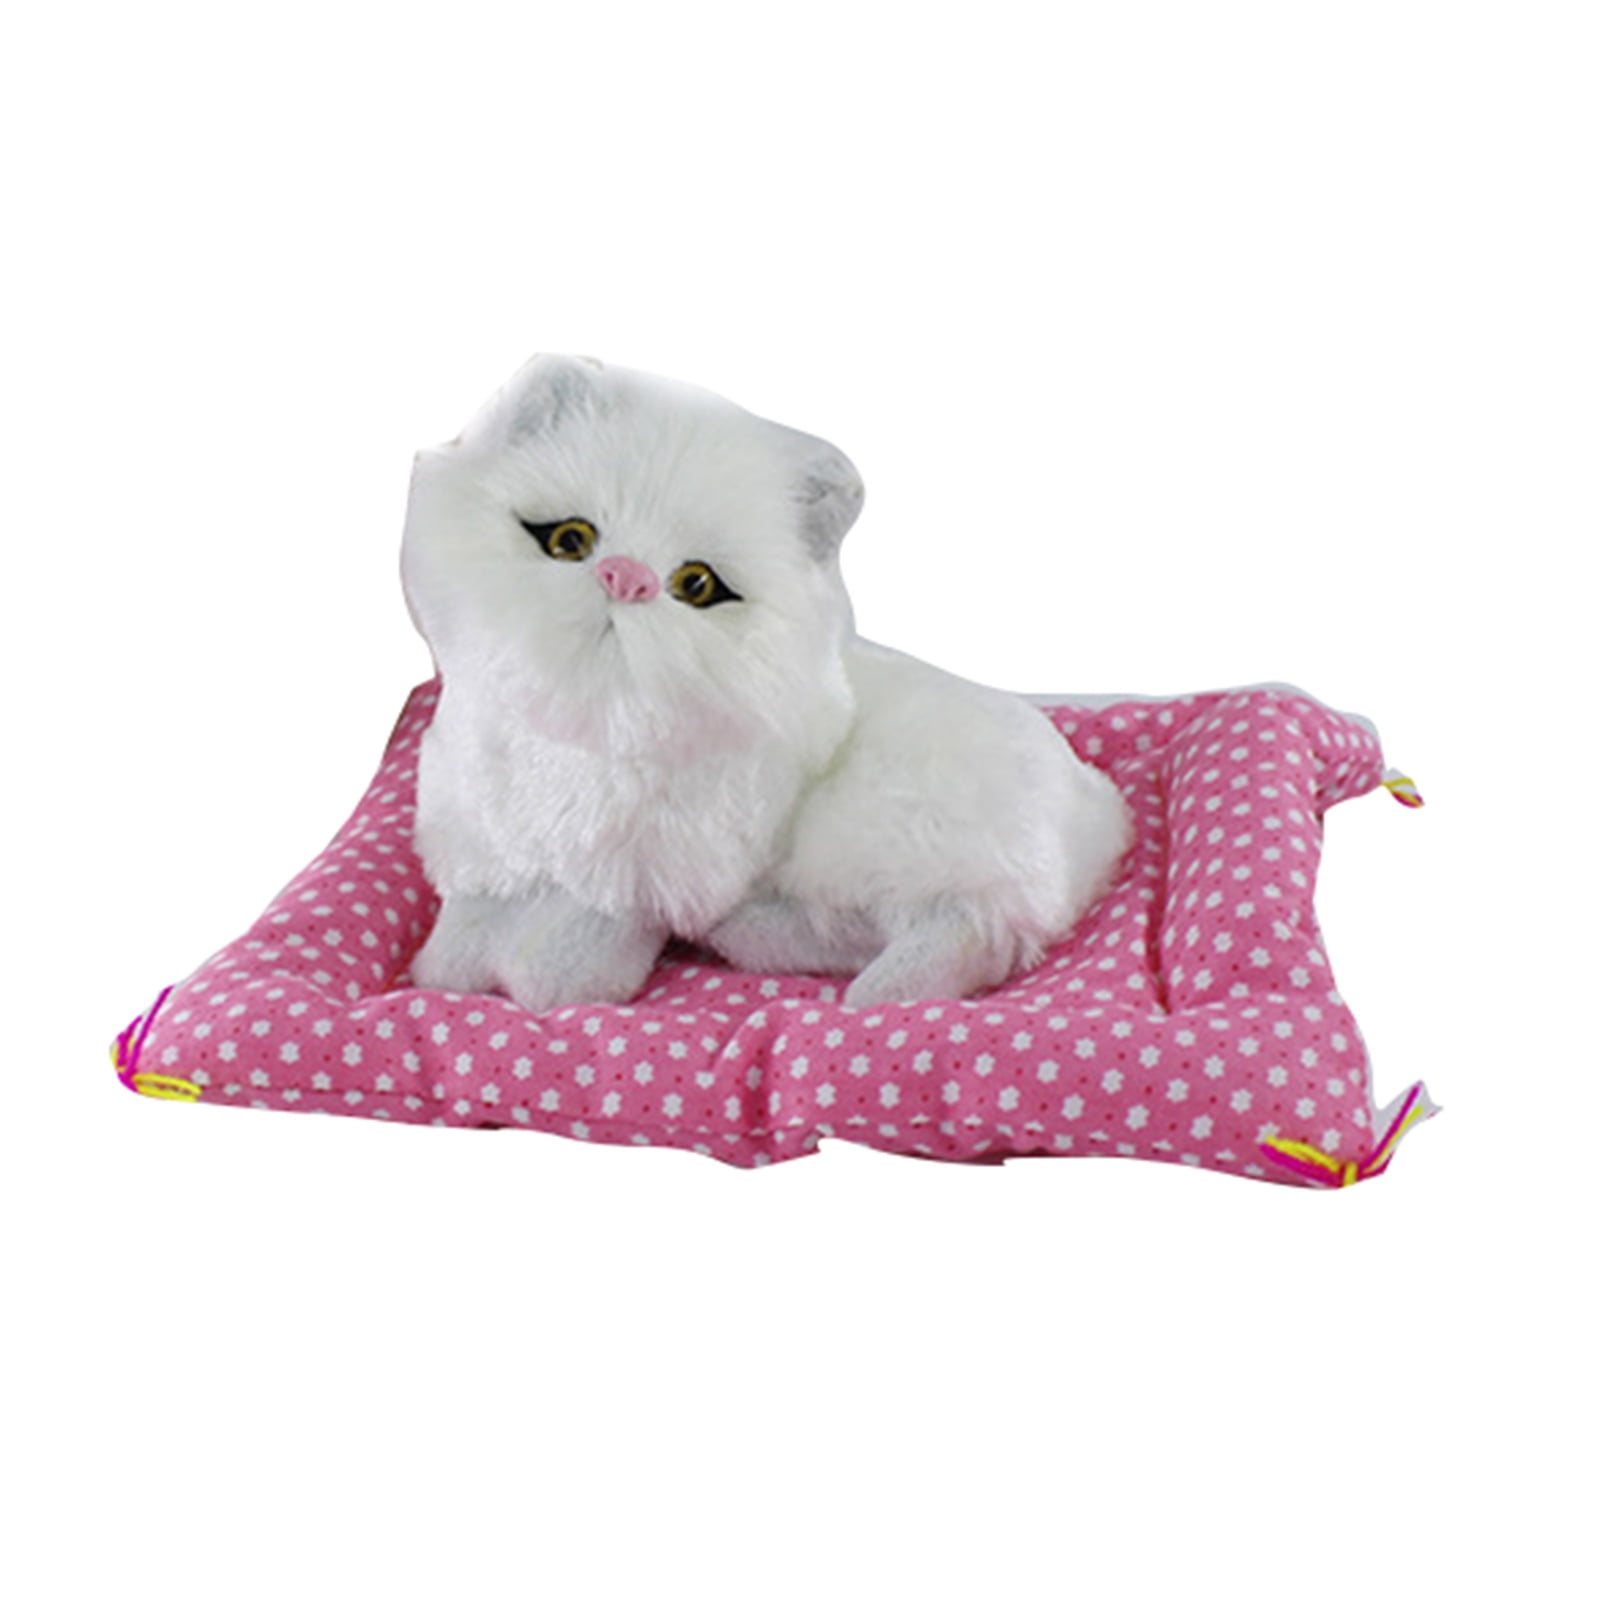 2018 Home Decor White Cat Plush Toy Simulation Mini Long Animal Doll Baby Gifts